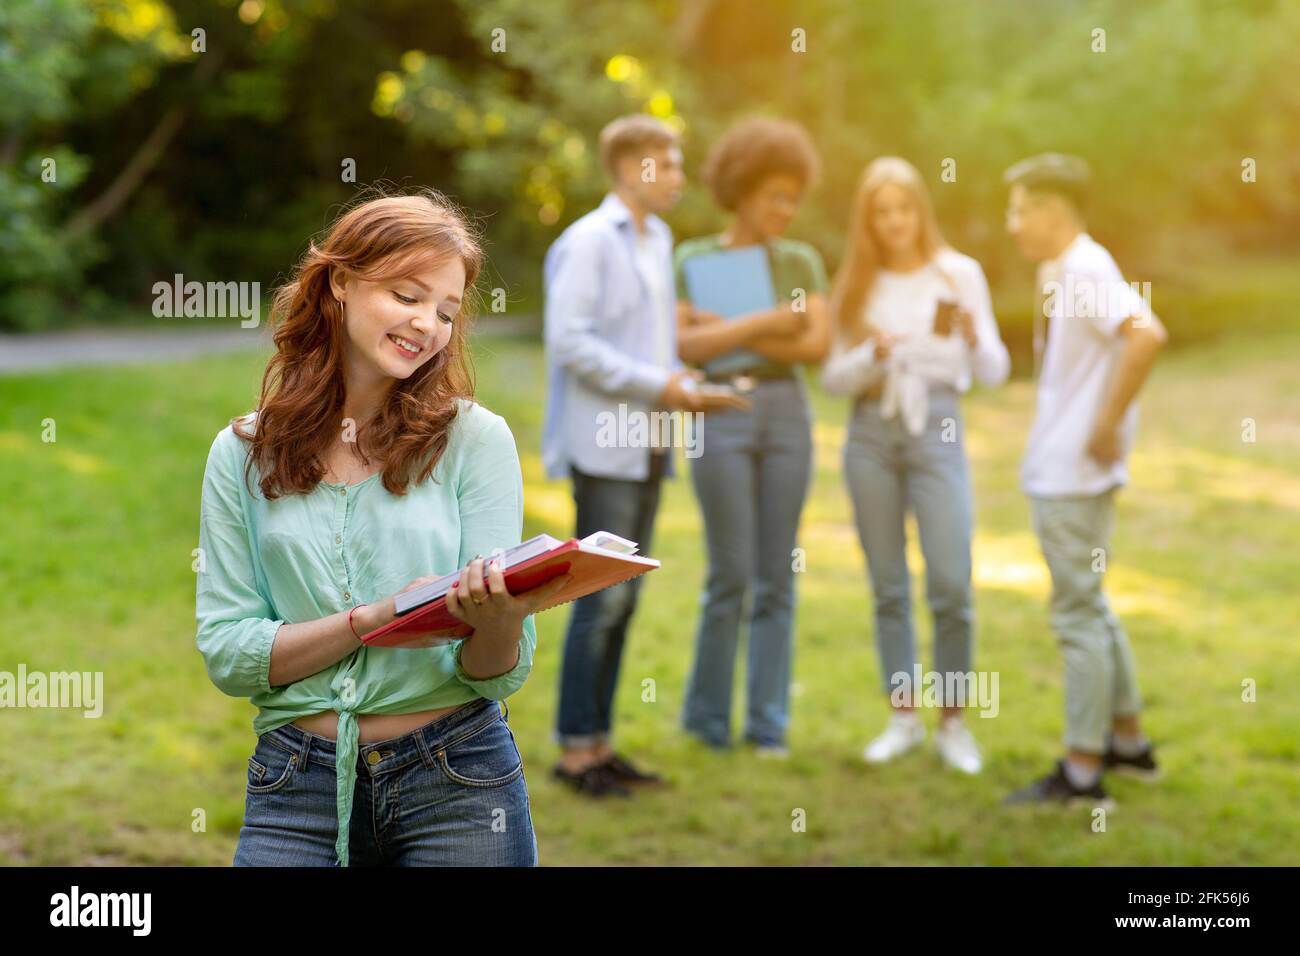 Student Exchange Programs. Beautiful College Girl Preparing For Lessons Outdoors With Notepad Stock Photo